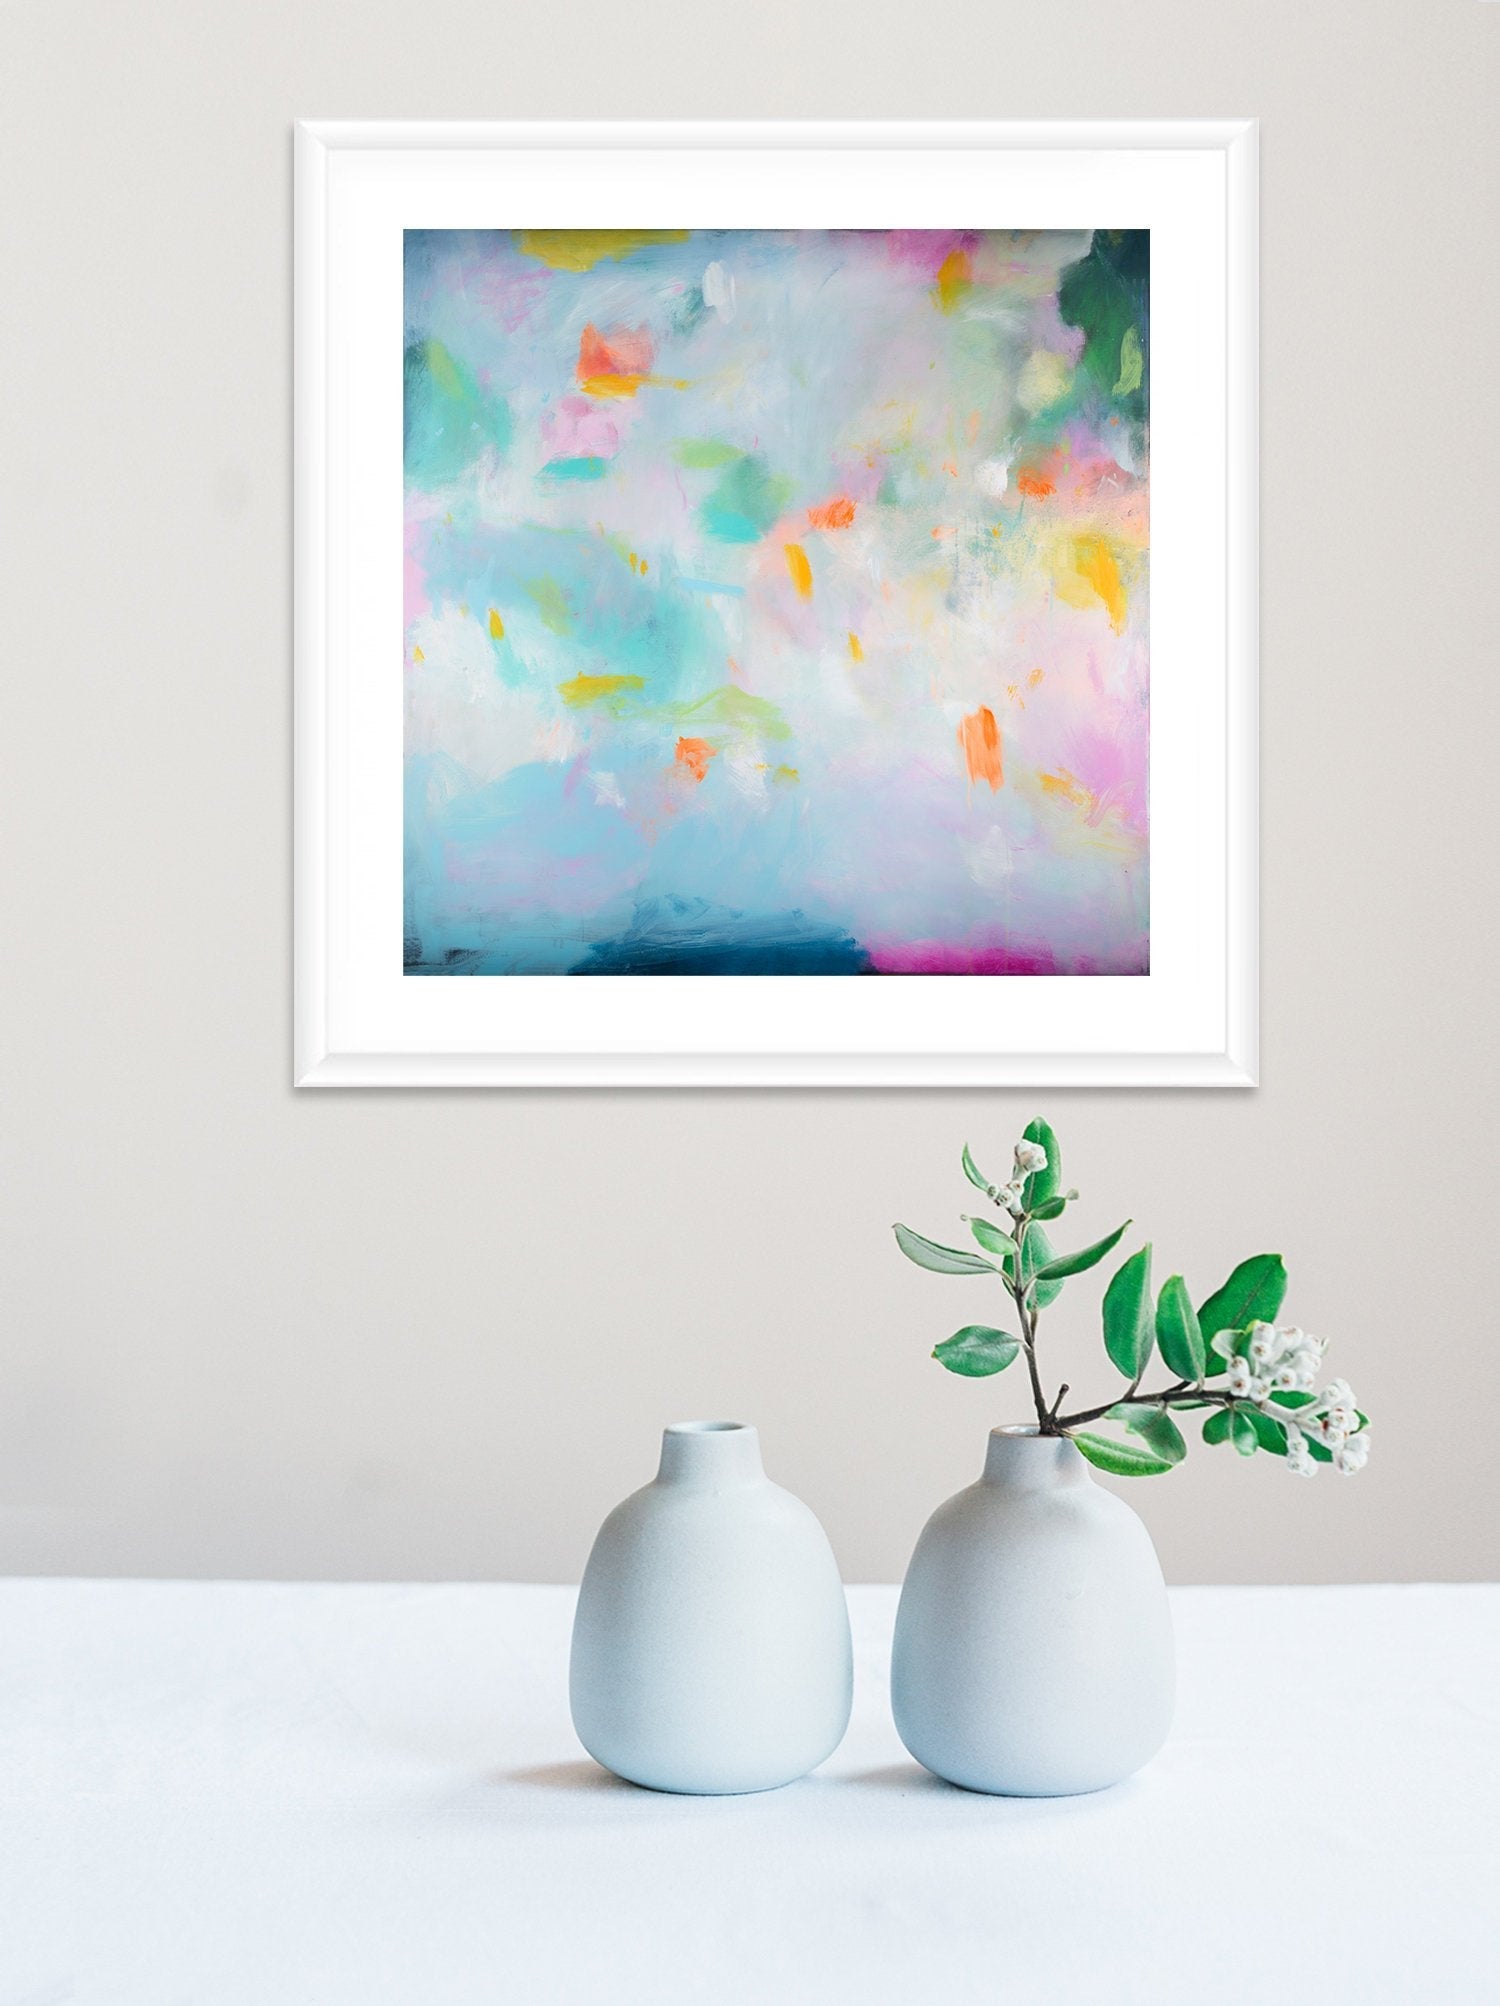 Green Abstract Landscape Print, Blue and Turquoise wall art print on Canvas, Contemporary Abstract Art, Seascape Wall Decor - camilomattis.com